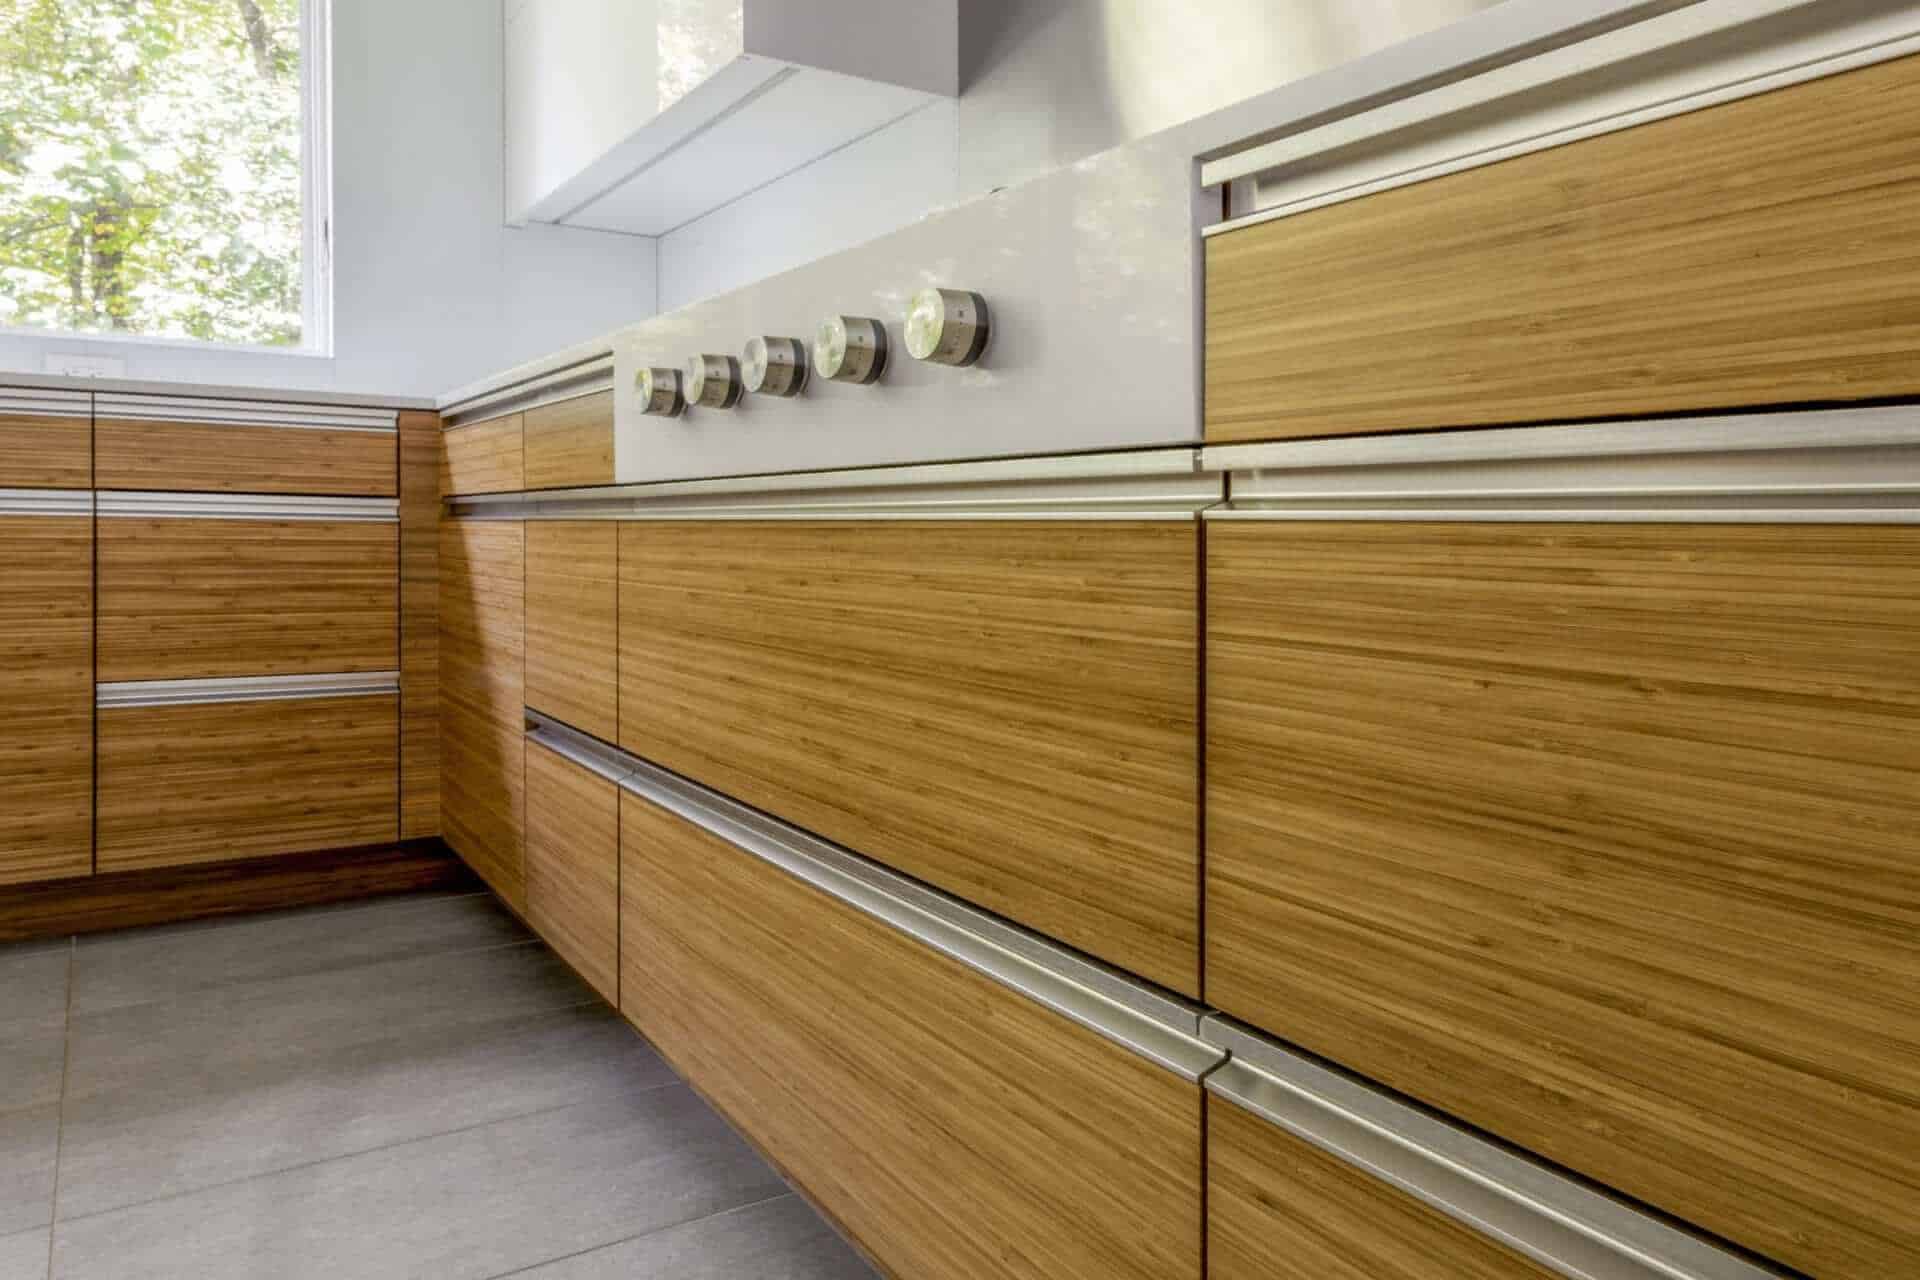 Clean, modern White Plains kitchen features NAC cabinets in both bamboo with caramel stain and white gloss, grey flooring and stainless channel hardware.